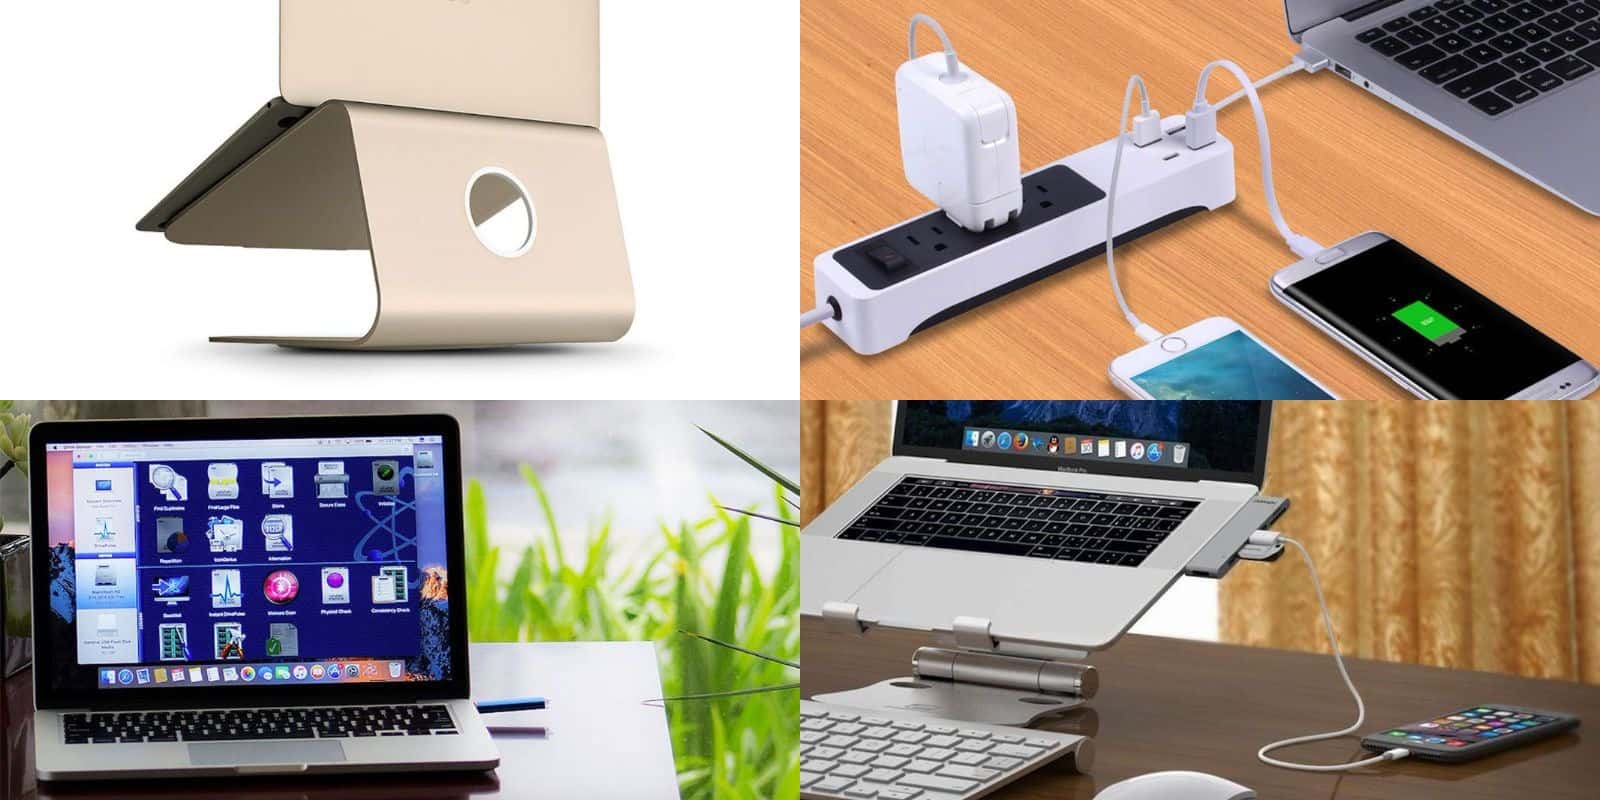 We've rounded up the best deals on essential accessories for your Macbook.